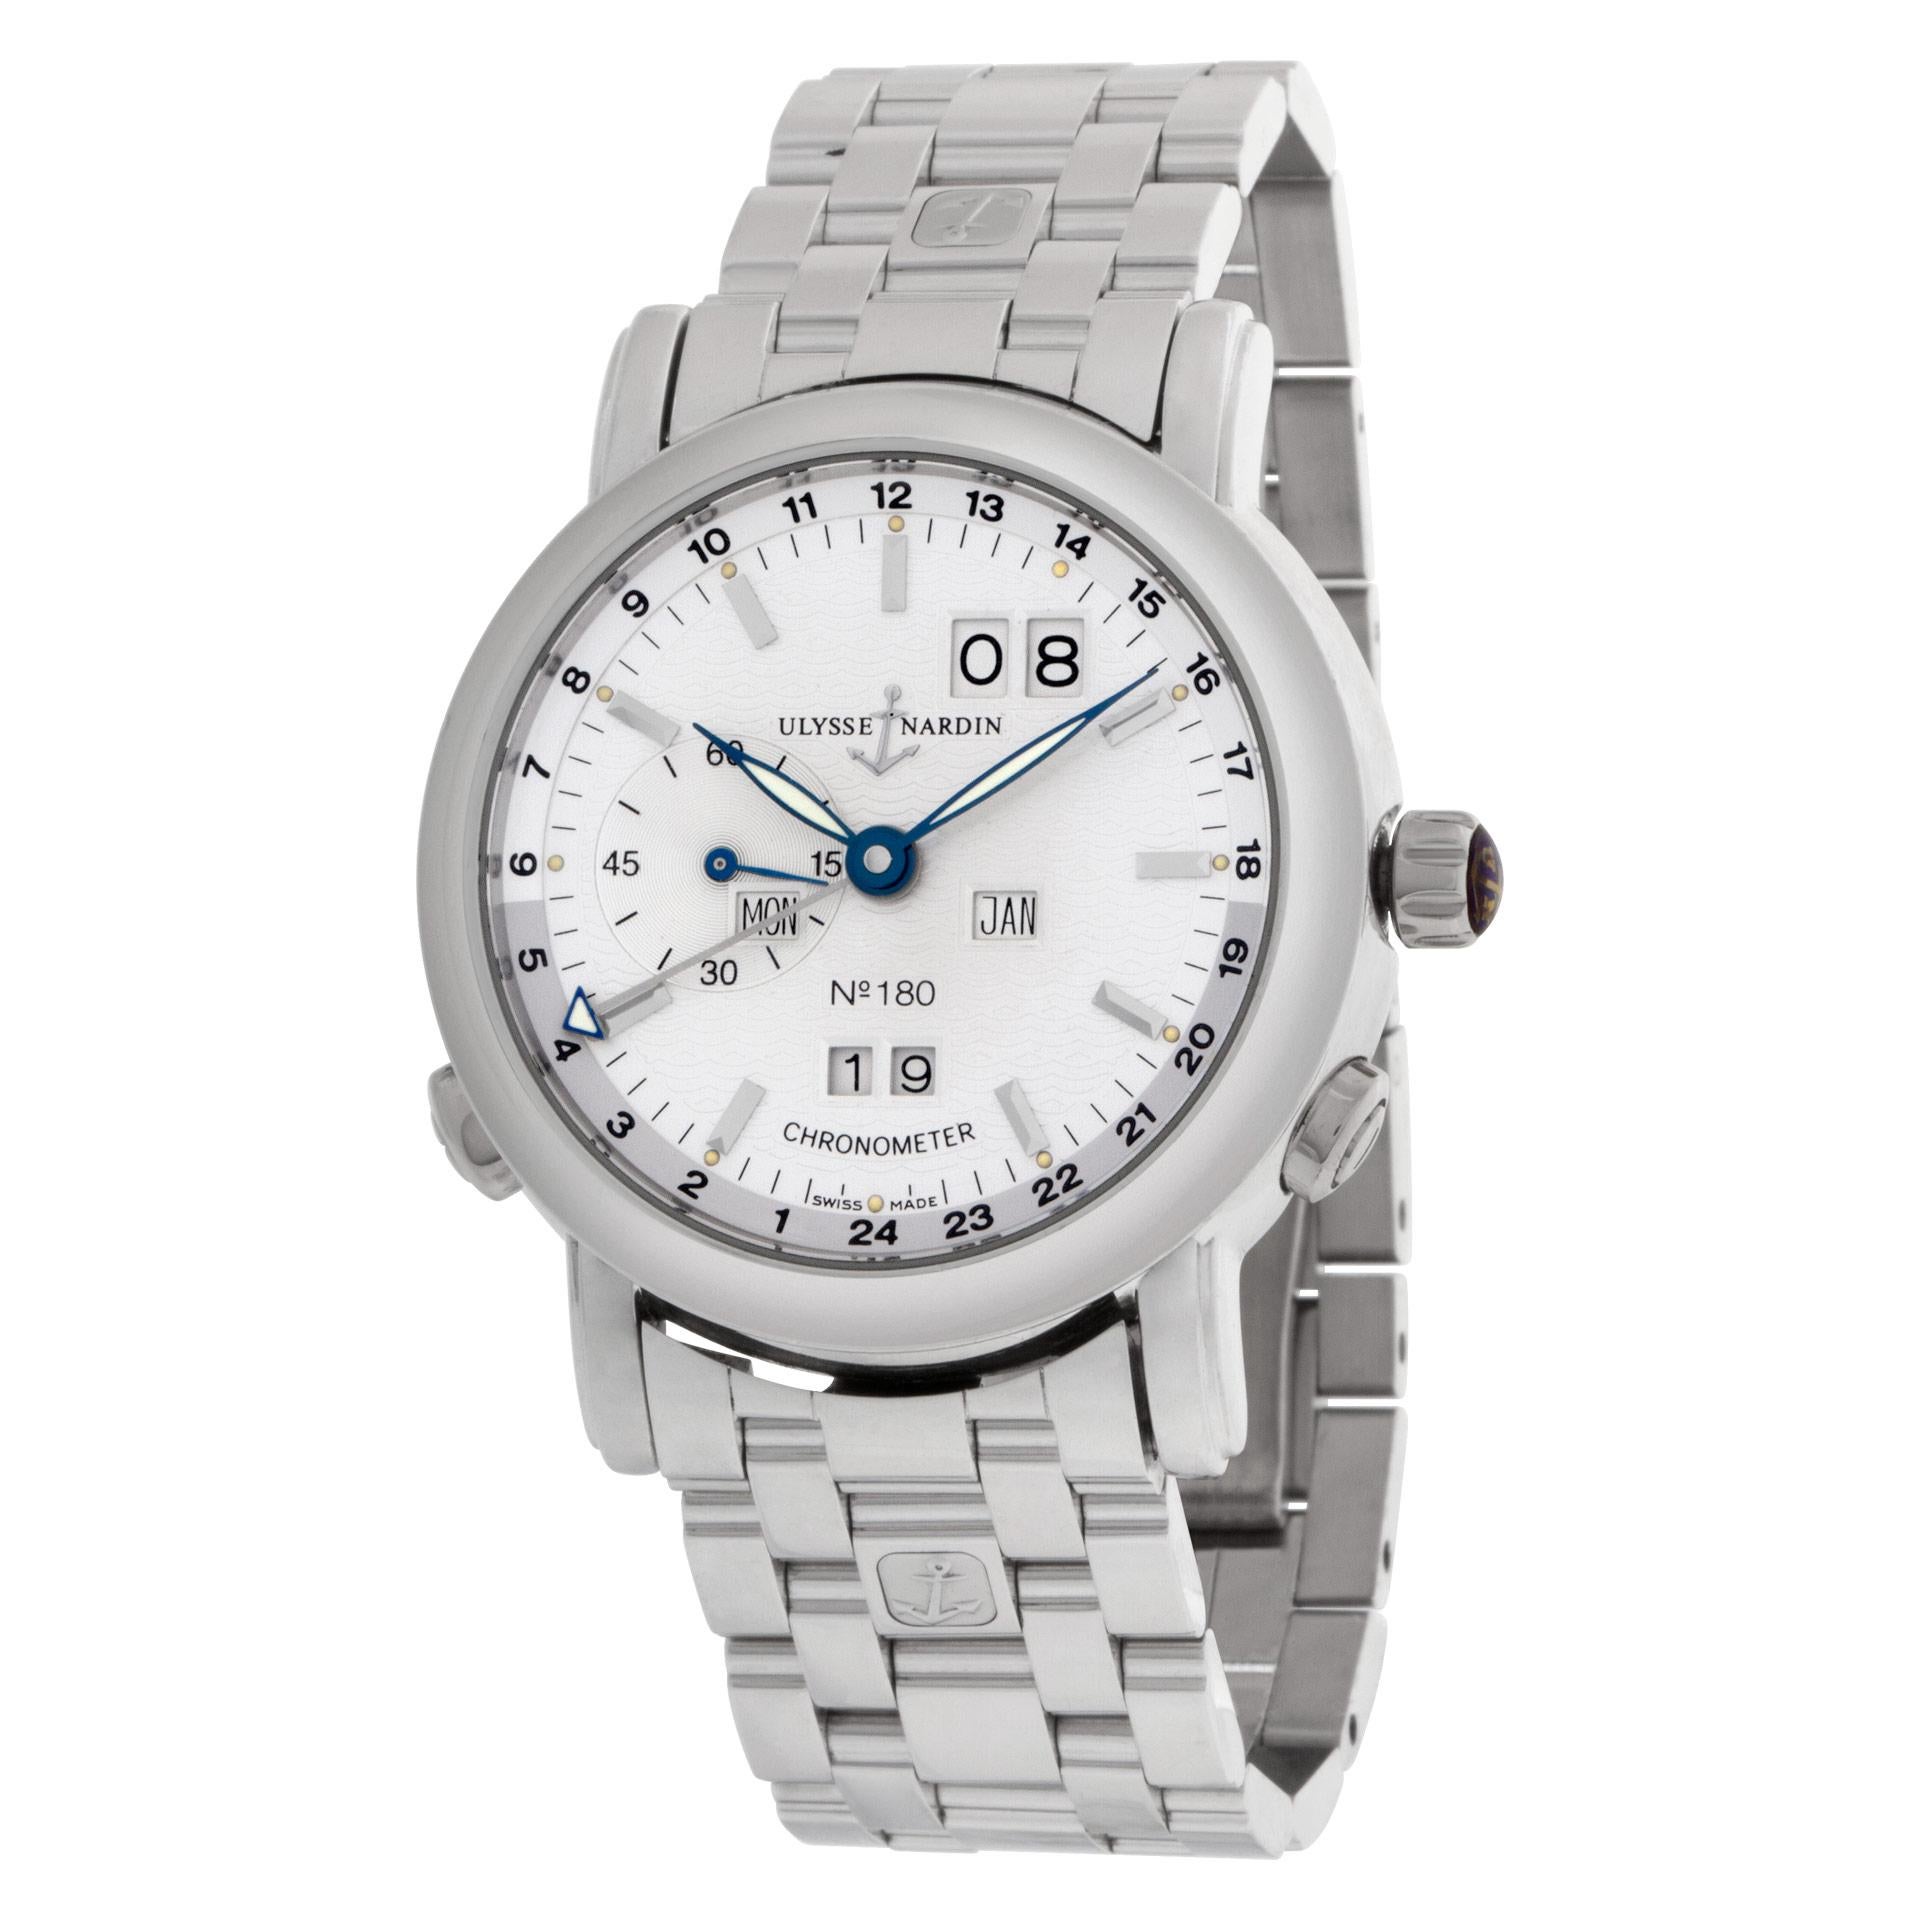 Ulysse Nardin Perpetual Calendar in platinum. Auto w/ subseconds, date, day, month and perpetual calendar. With box papers and certificates. 38mm case size. Ref 329-80. Limited to 500 pieces. Circa 2001. Fine Pre-owned Ulysse Nardin Watch. 